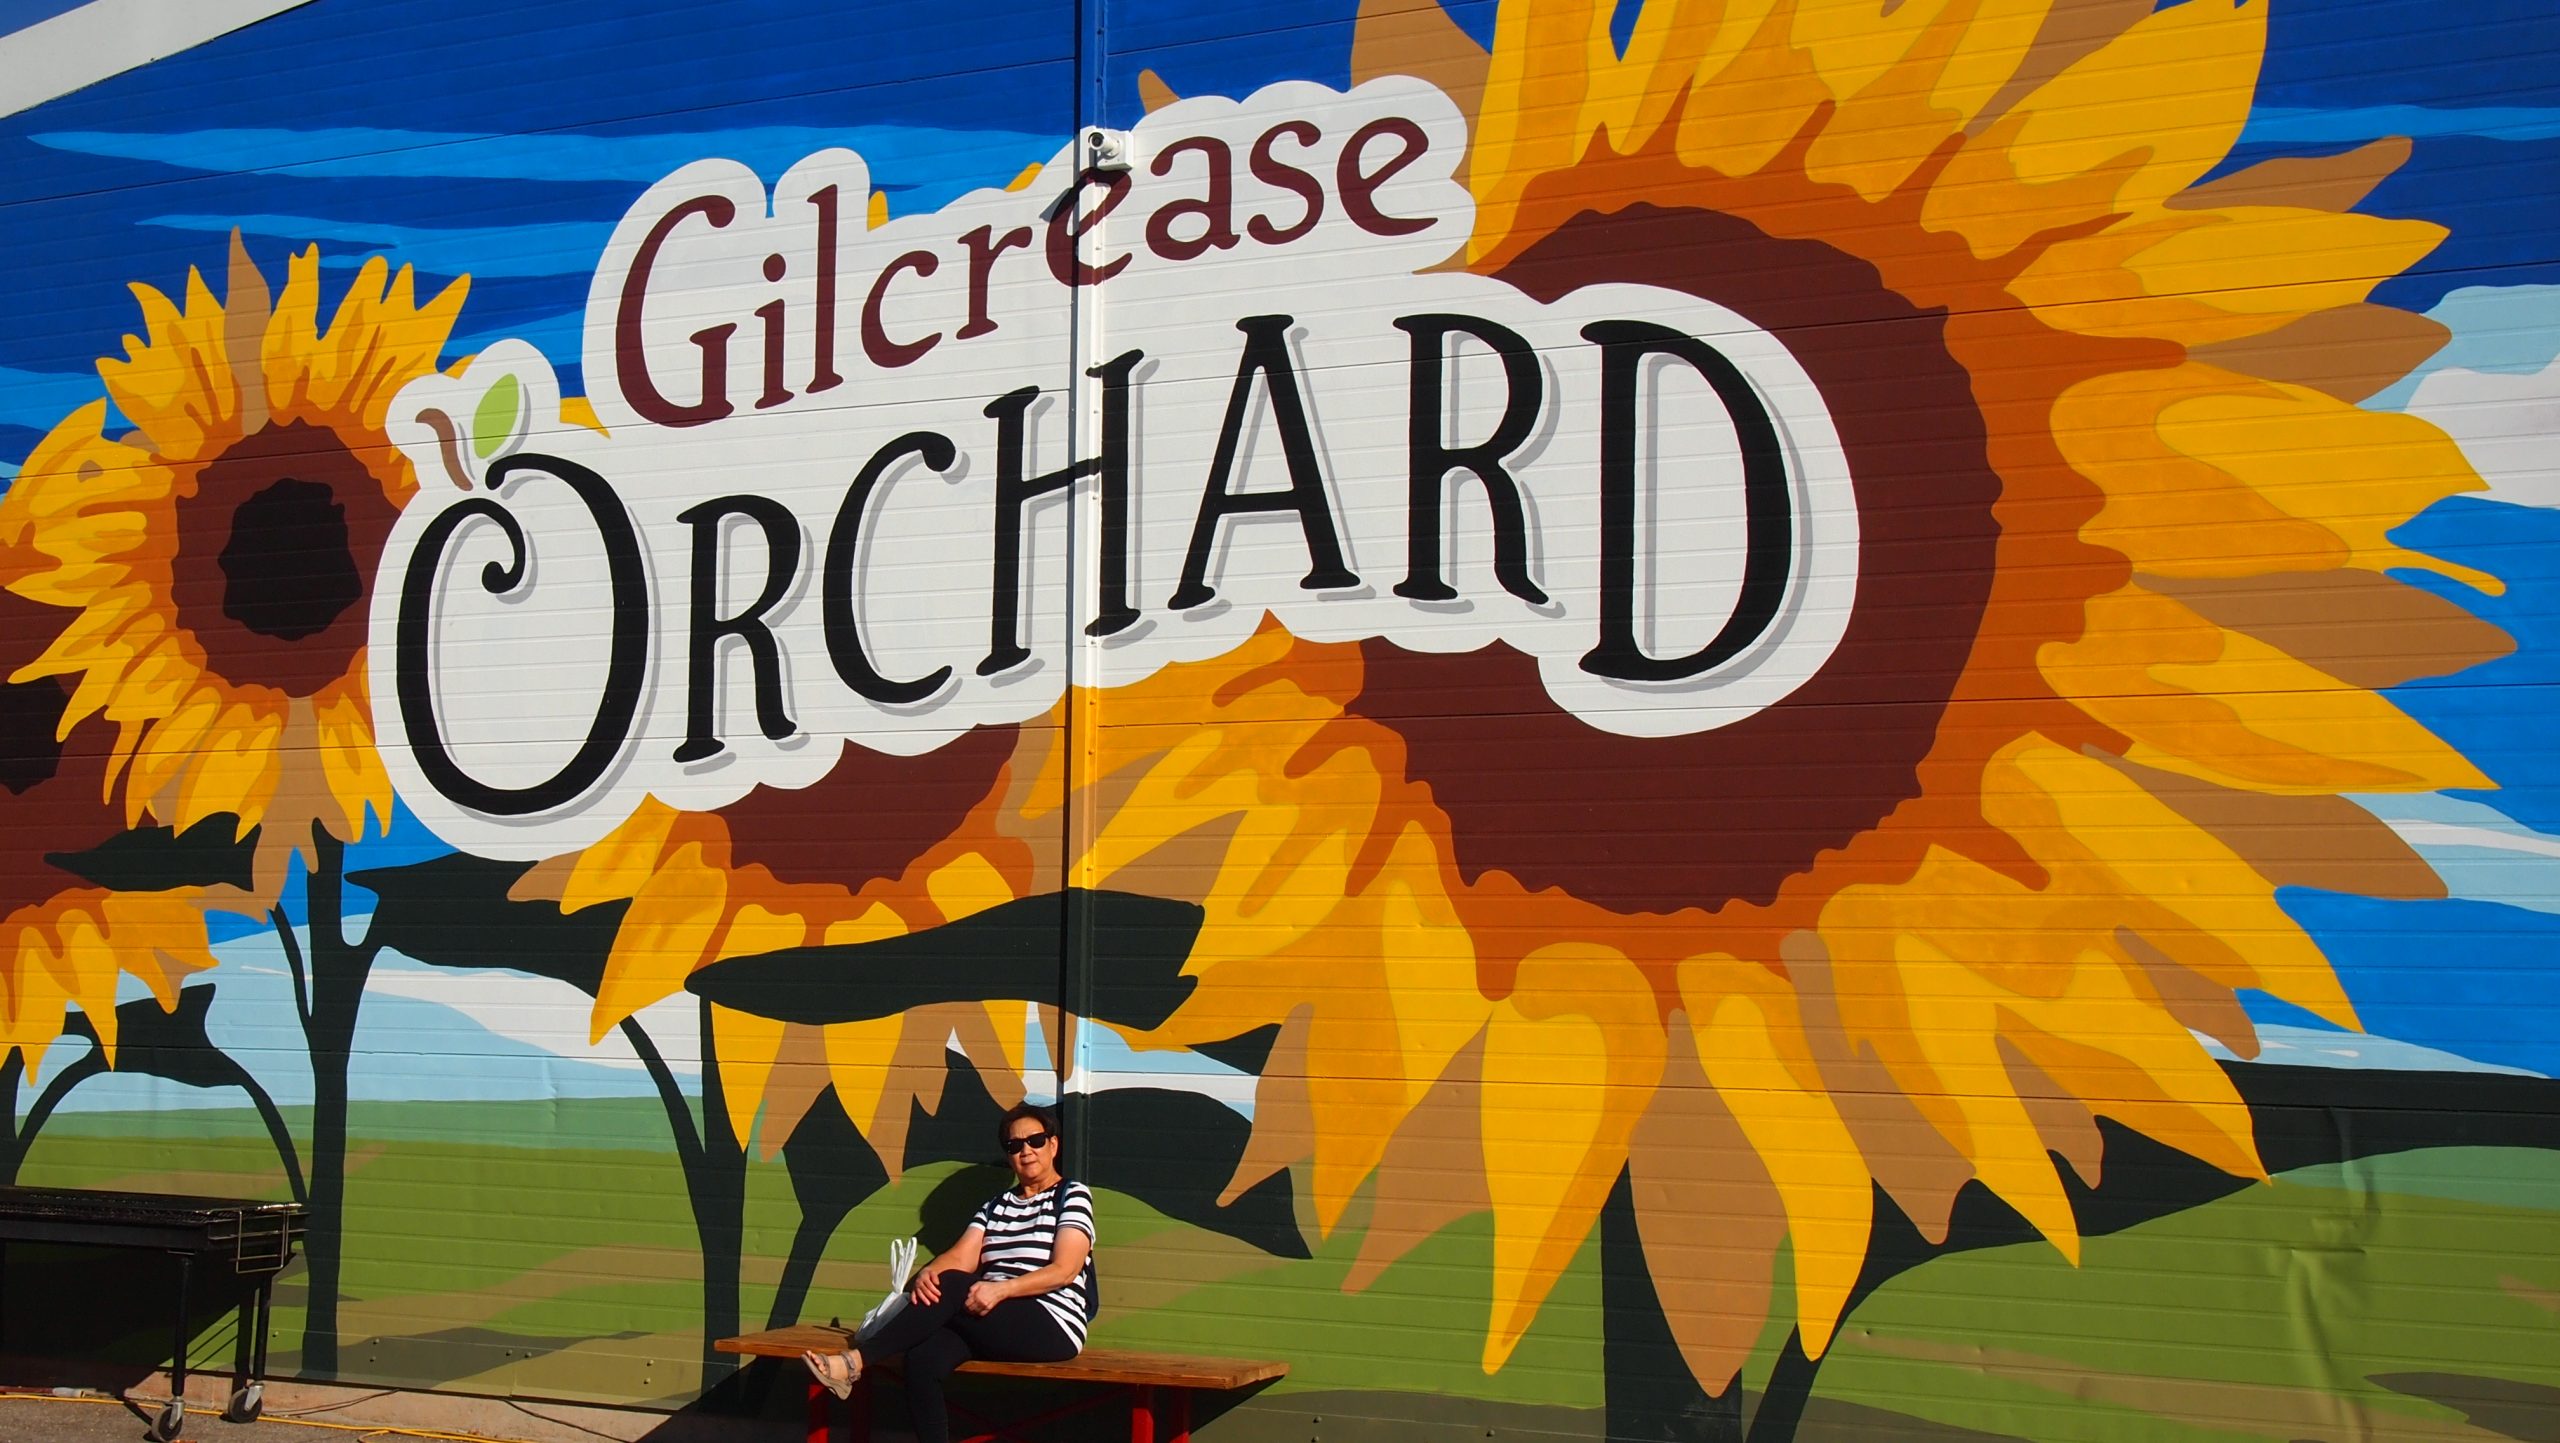 Gilcrease Orchard Sign